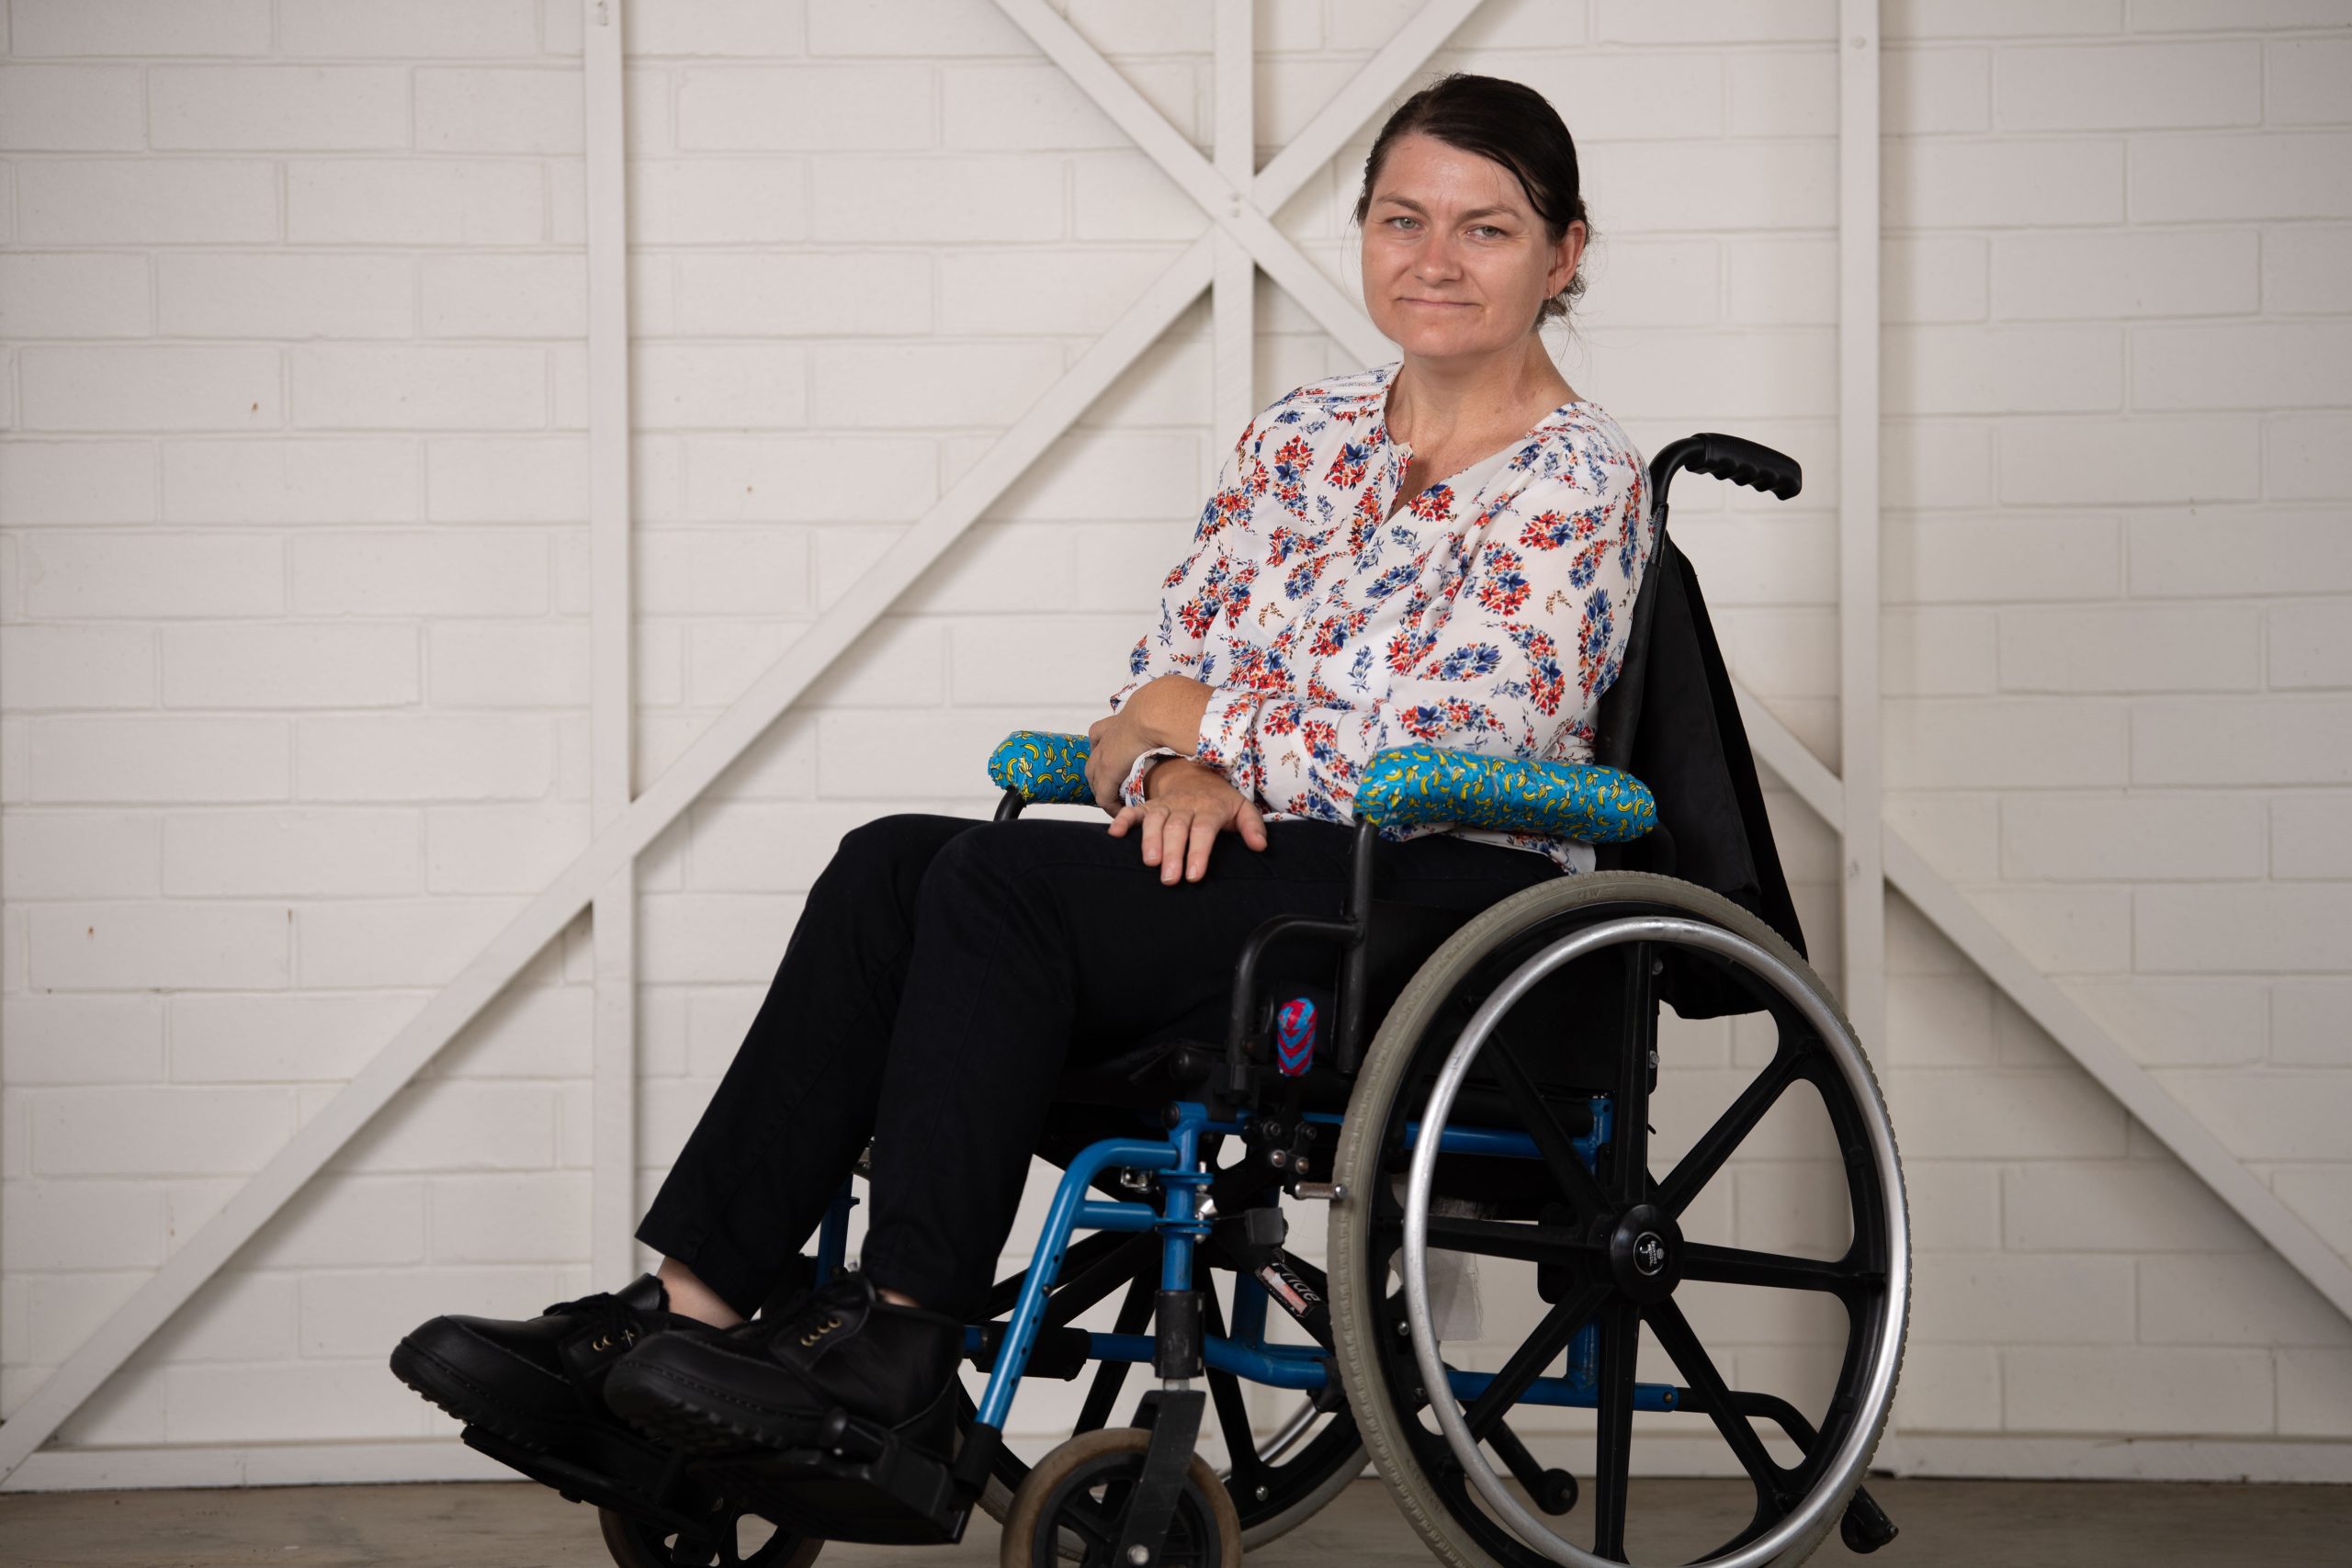 A woman with dark brown hair, wearing a white long sleeved patterned shirt with black pants and she is sitting in a wheelchair.